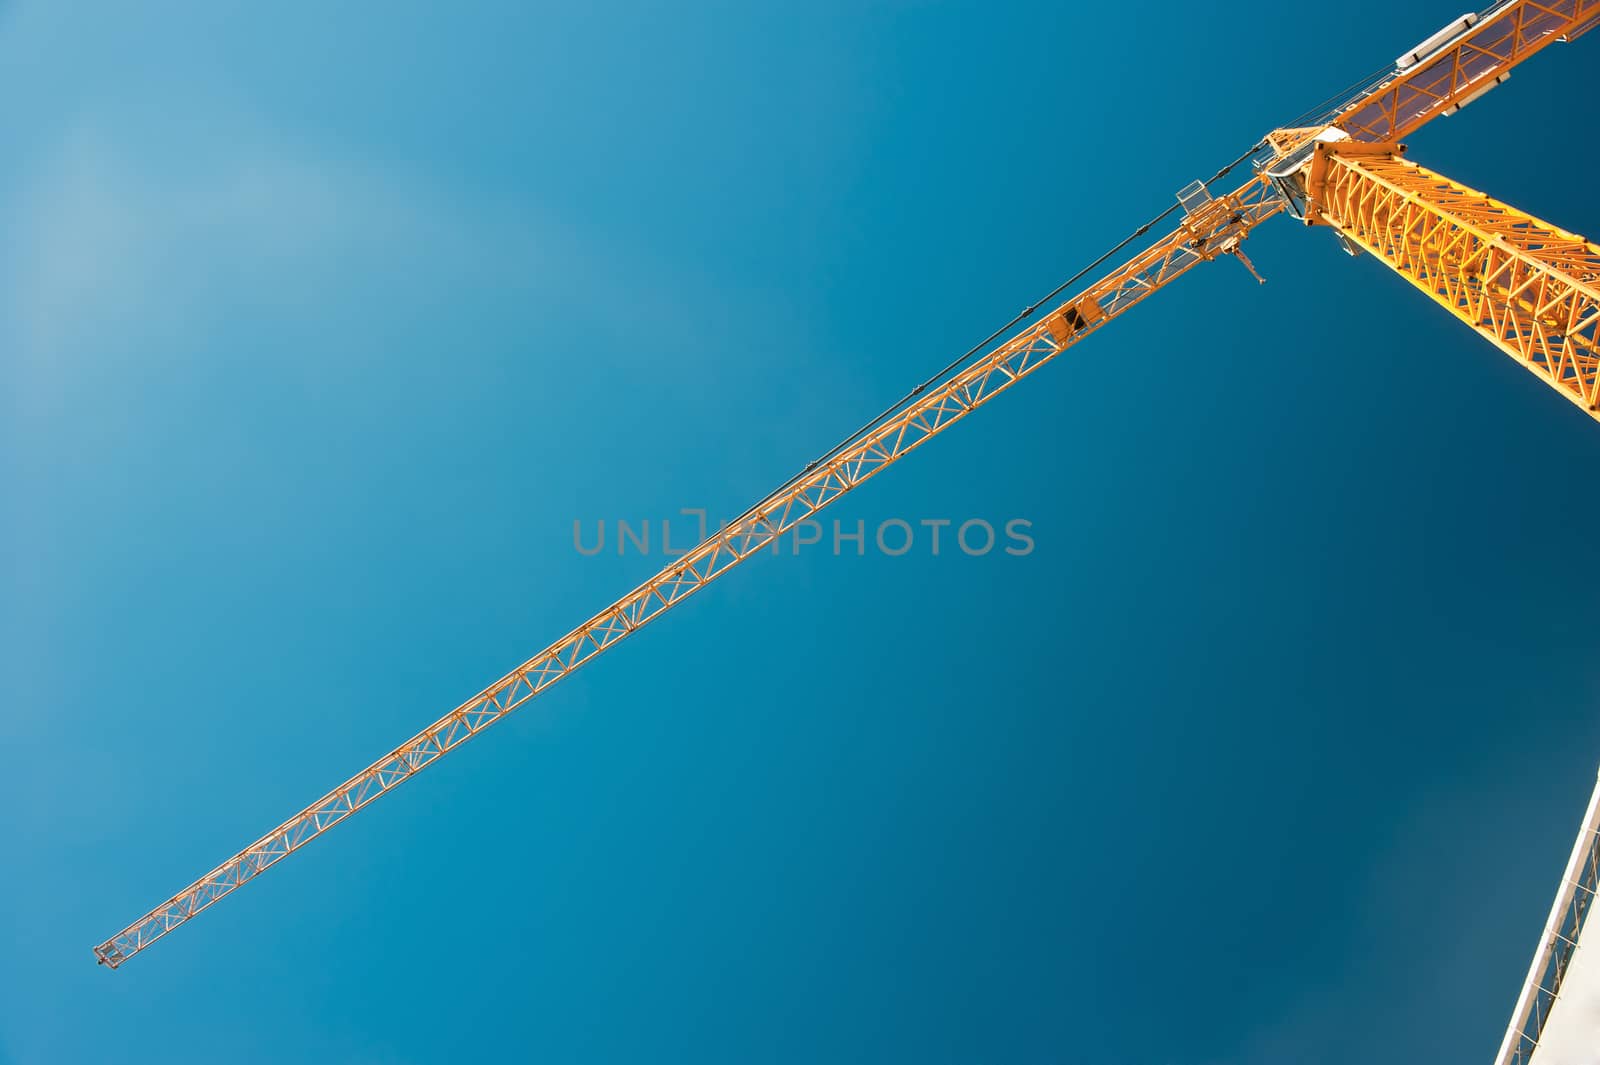 Tower crane with a jib boom type